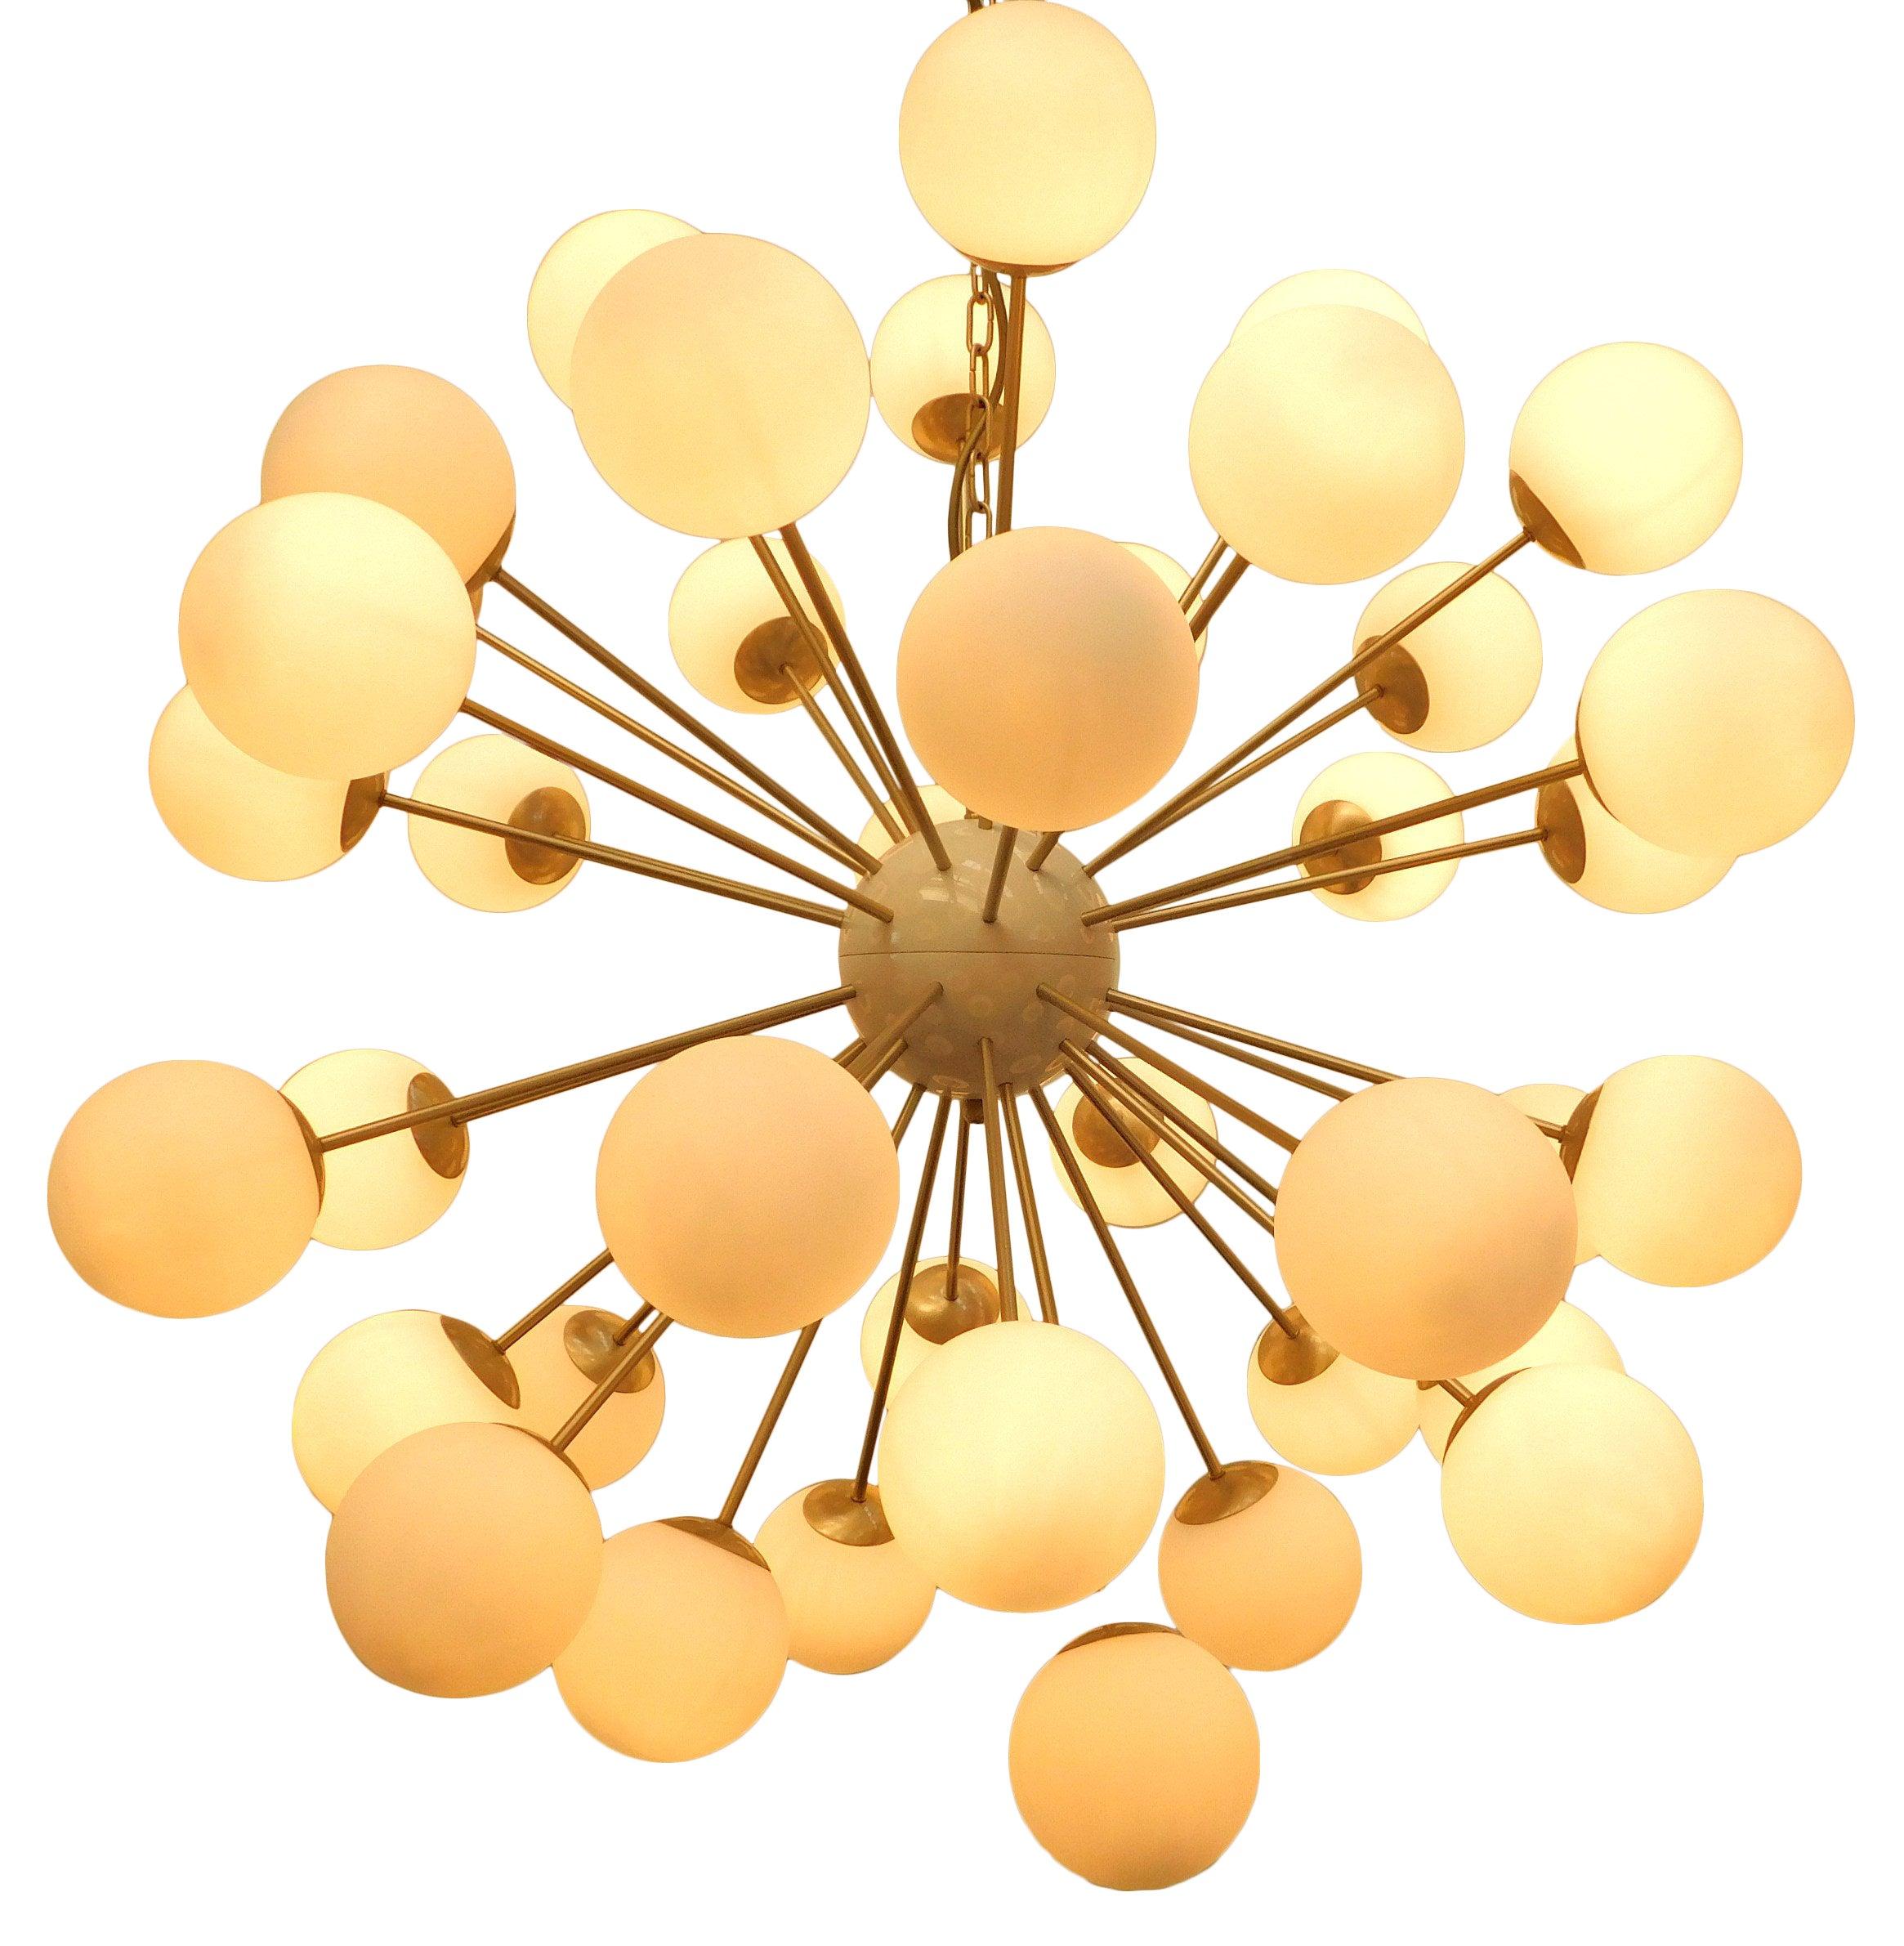 Italian sputnik chandelier with 40 Murano glass globes mounted on brass frame / Designed by Fabio Bergomi for Fabio Ltd / Made in Italy
40 lights / E12 or E14 type / max 40W each
Measures: diameter 49 inches / height 49 inches plus chain and